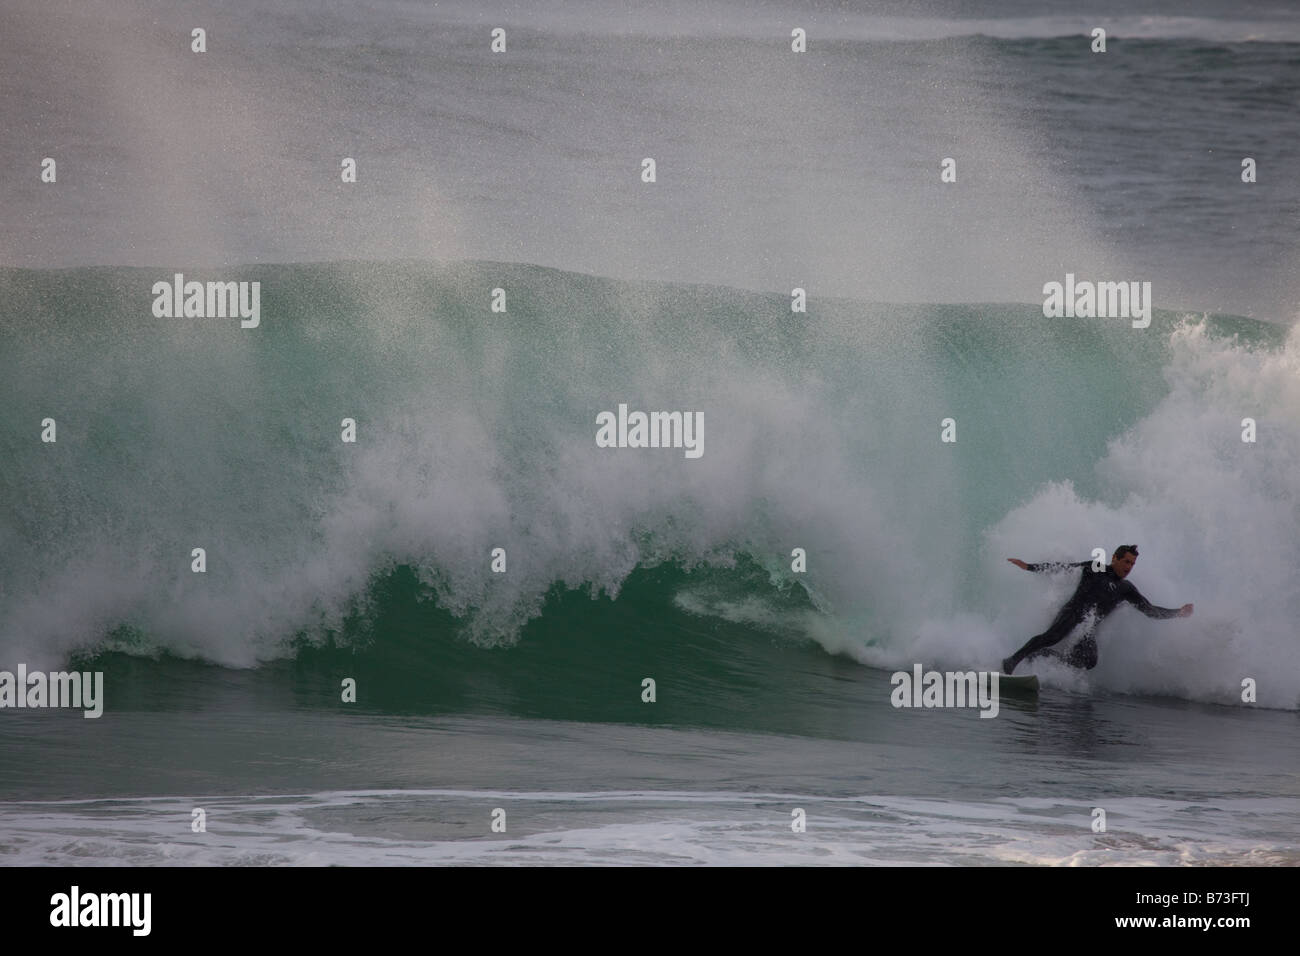 Surfer Wipe out at Guincho beach, Portugal Stock Photo